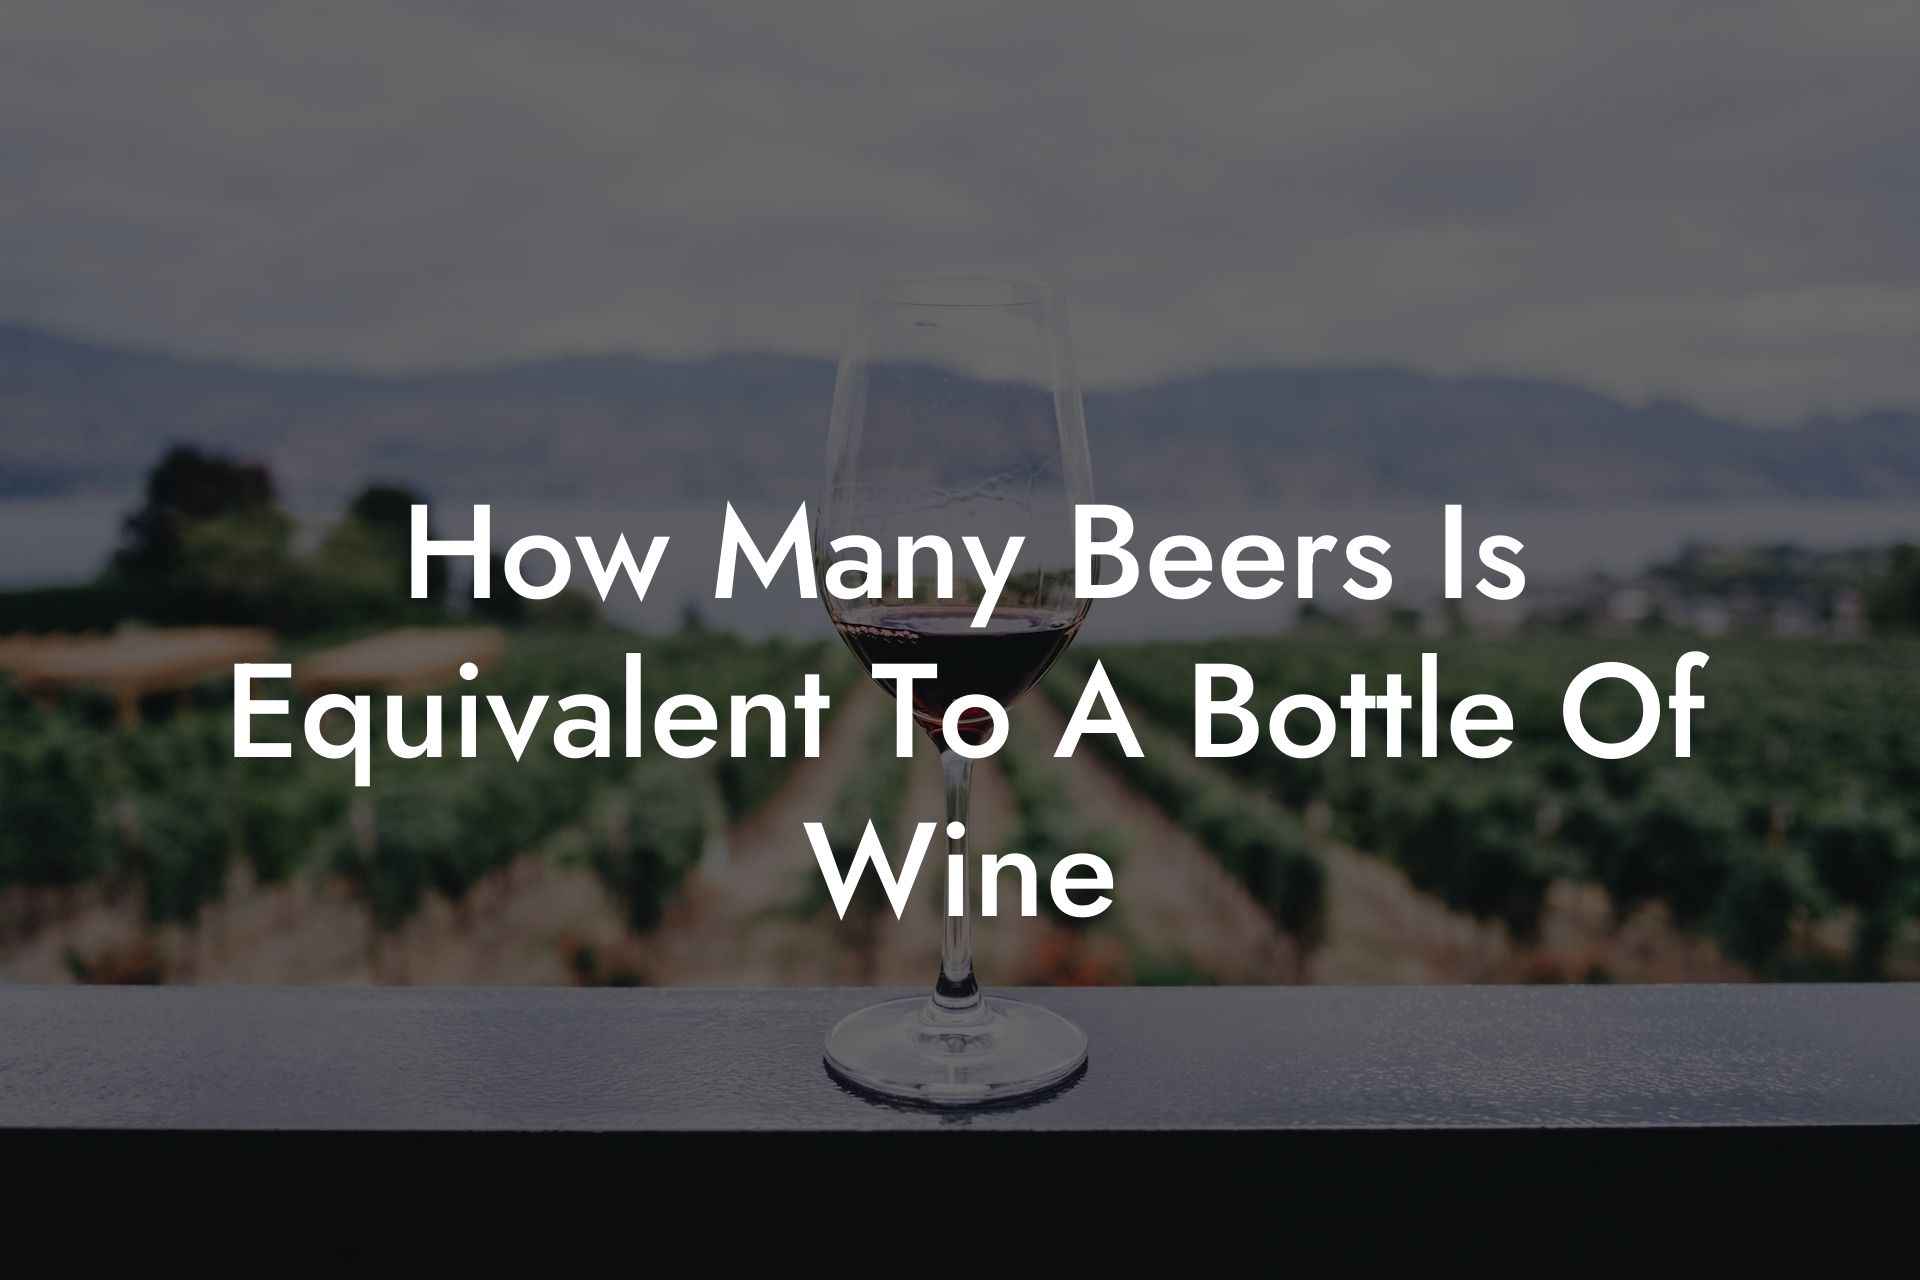 How Many Beers Is Equivalent To A Bottle Of Wine